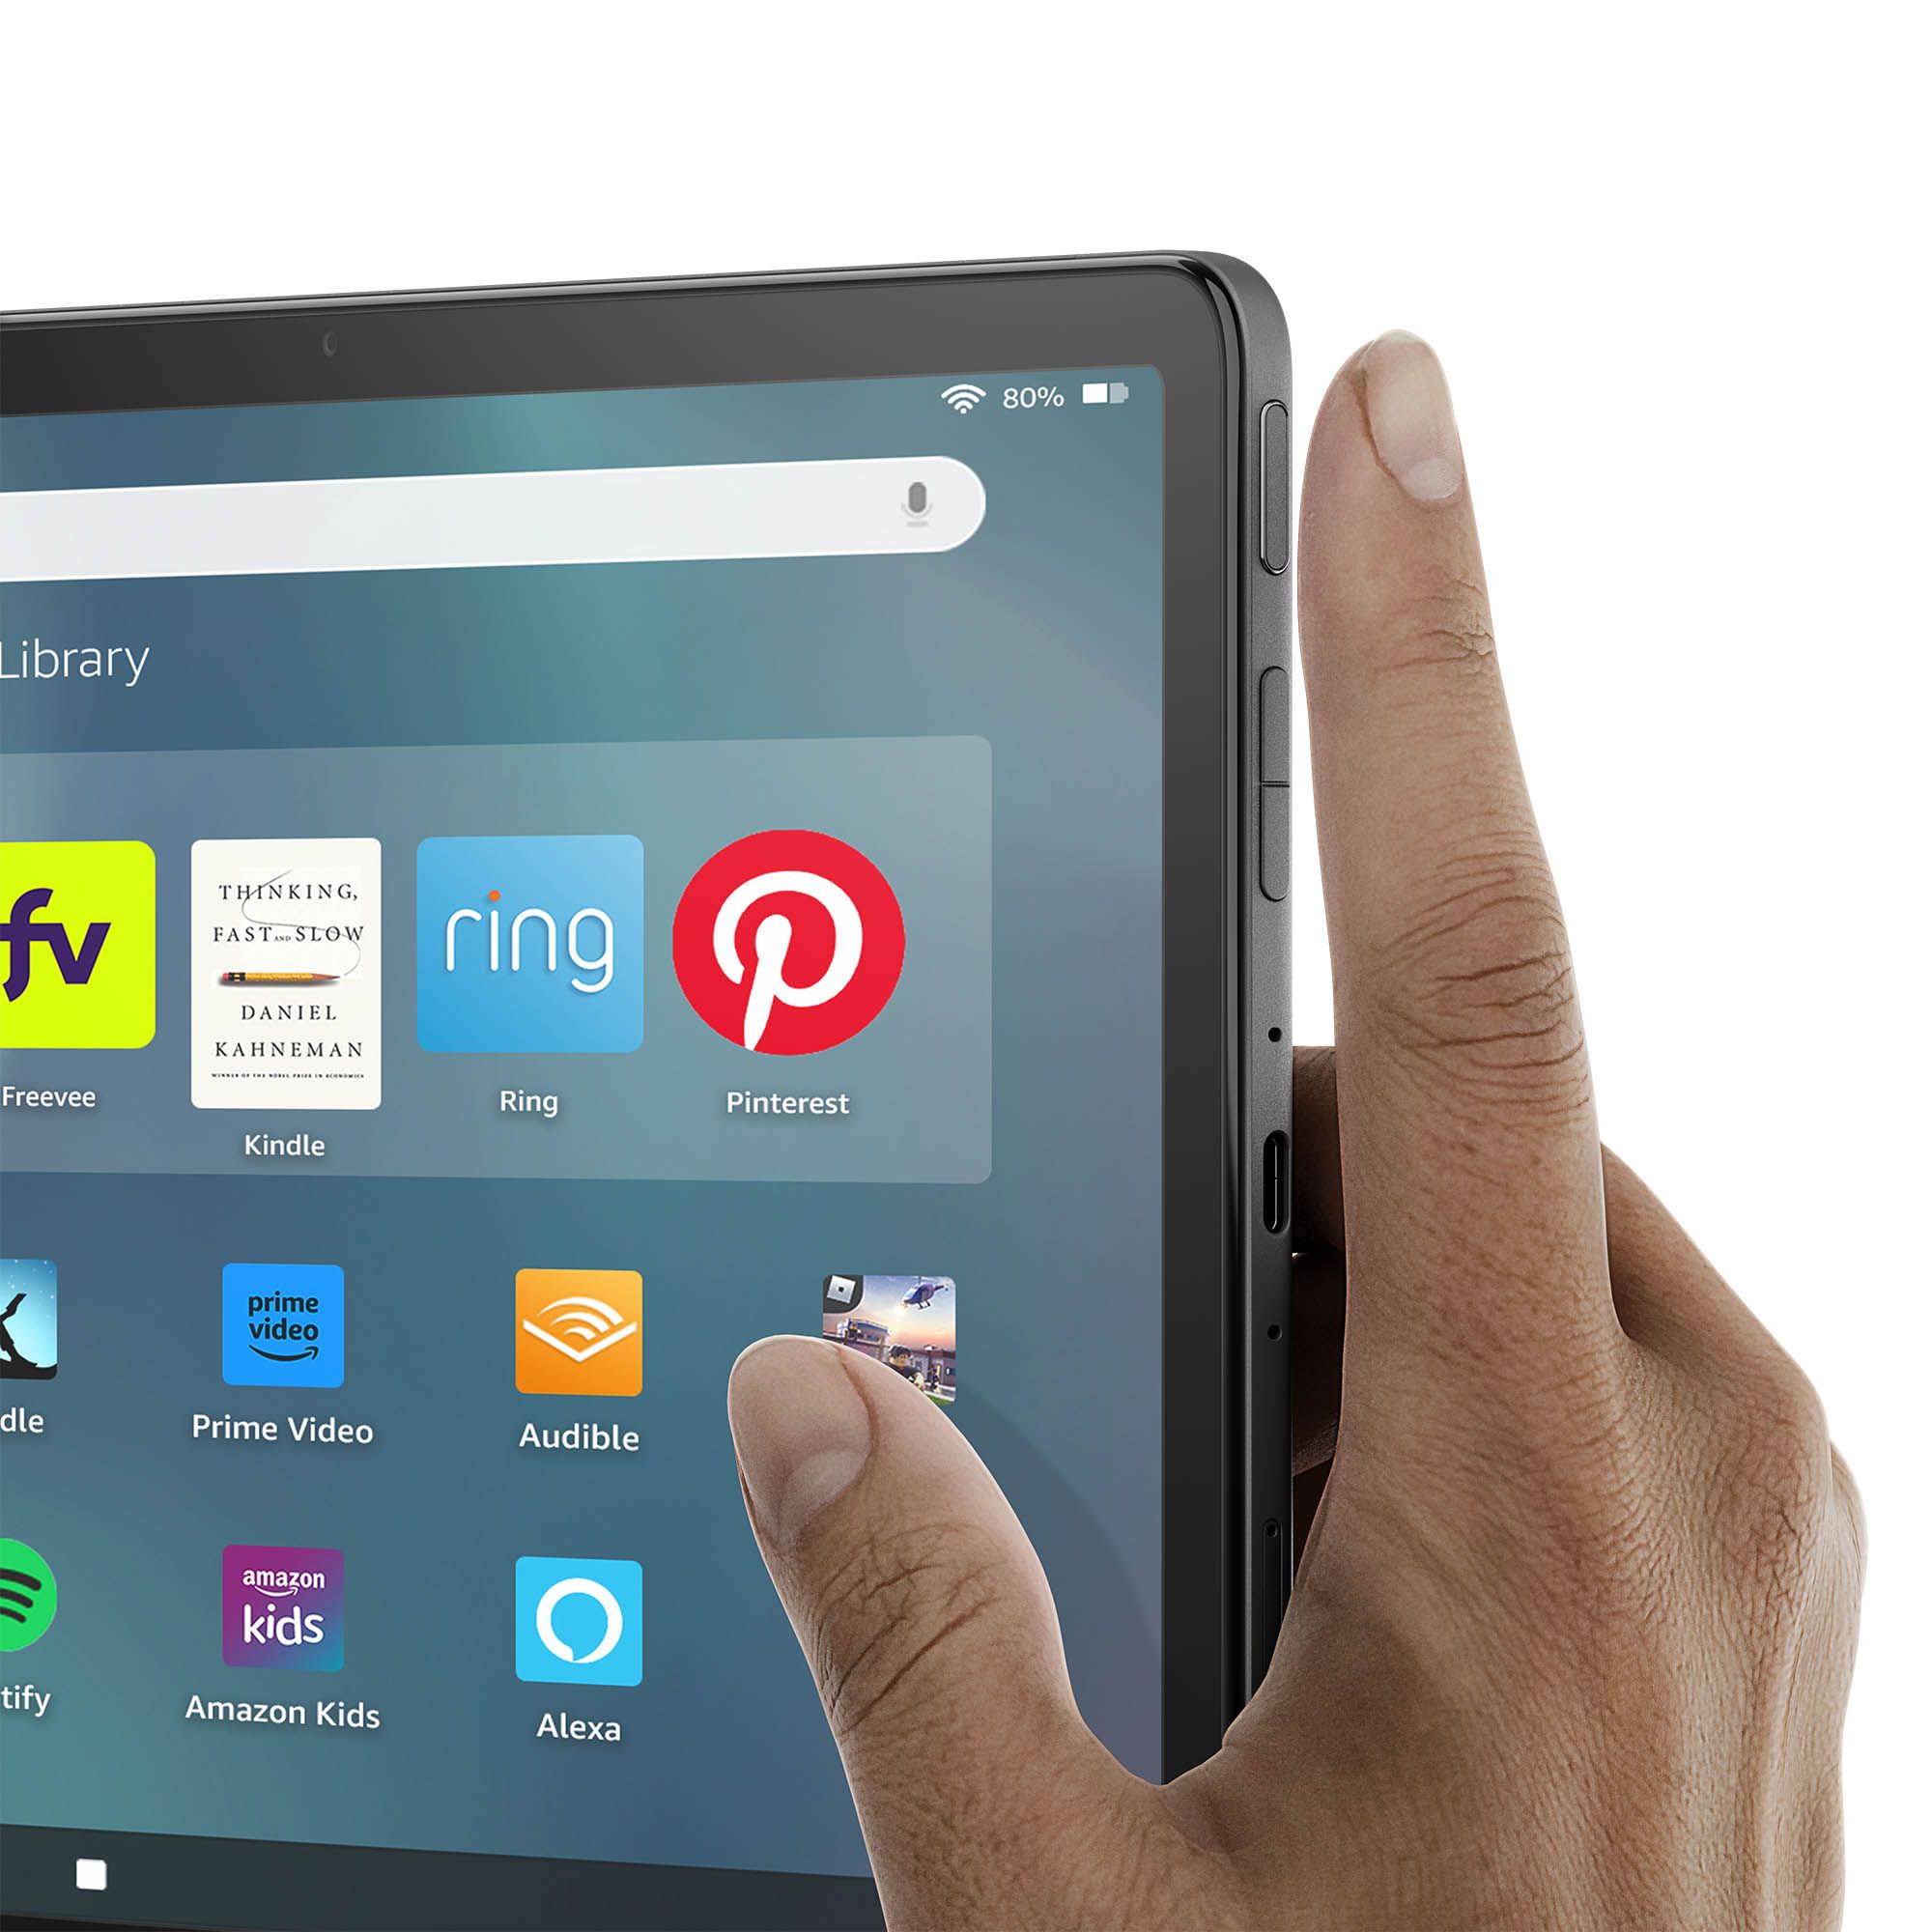 Amazon's Fire Max 11 wants to dominate the midrange Android tablet